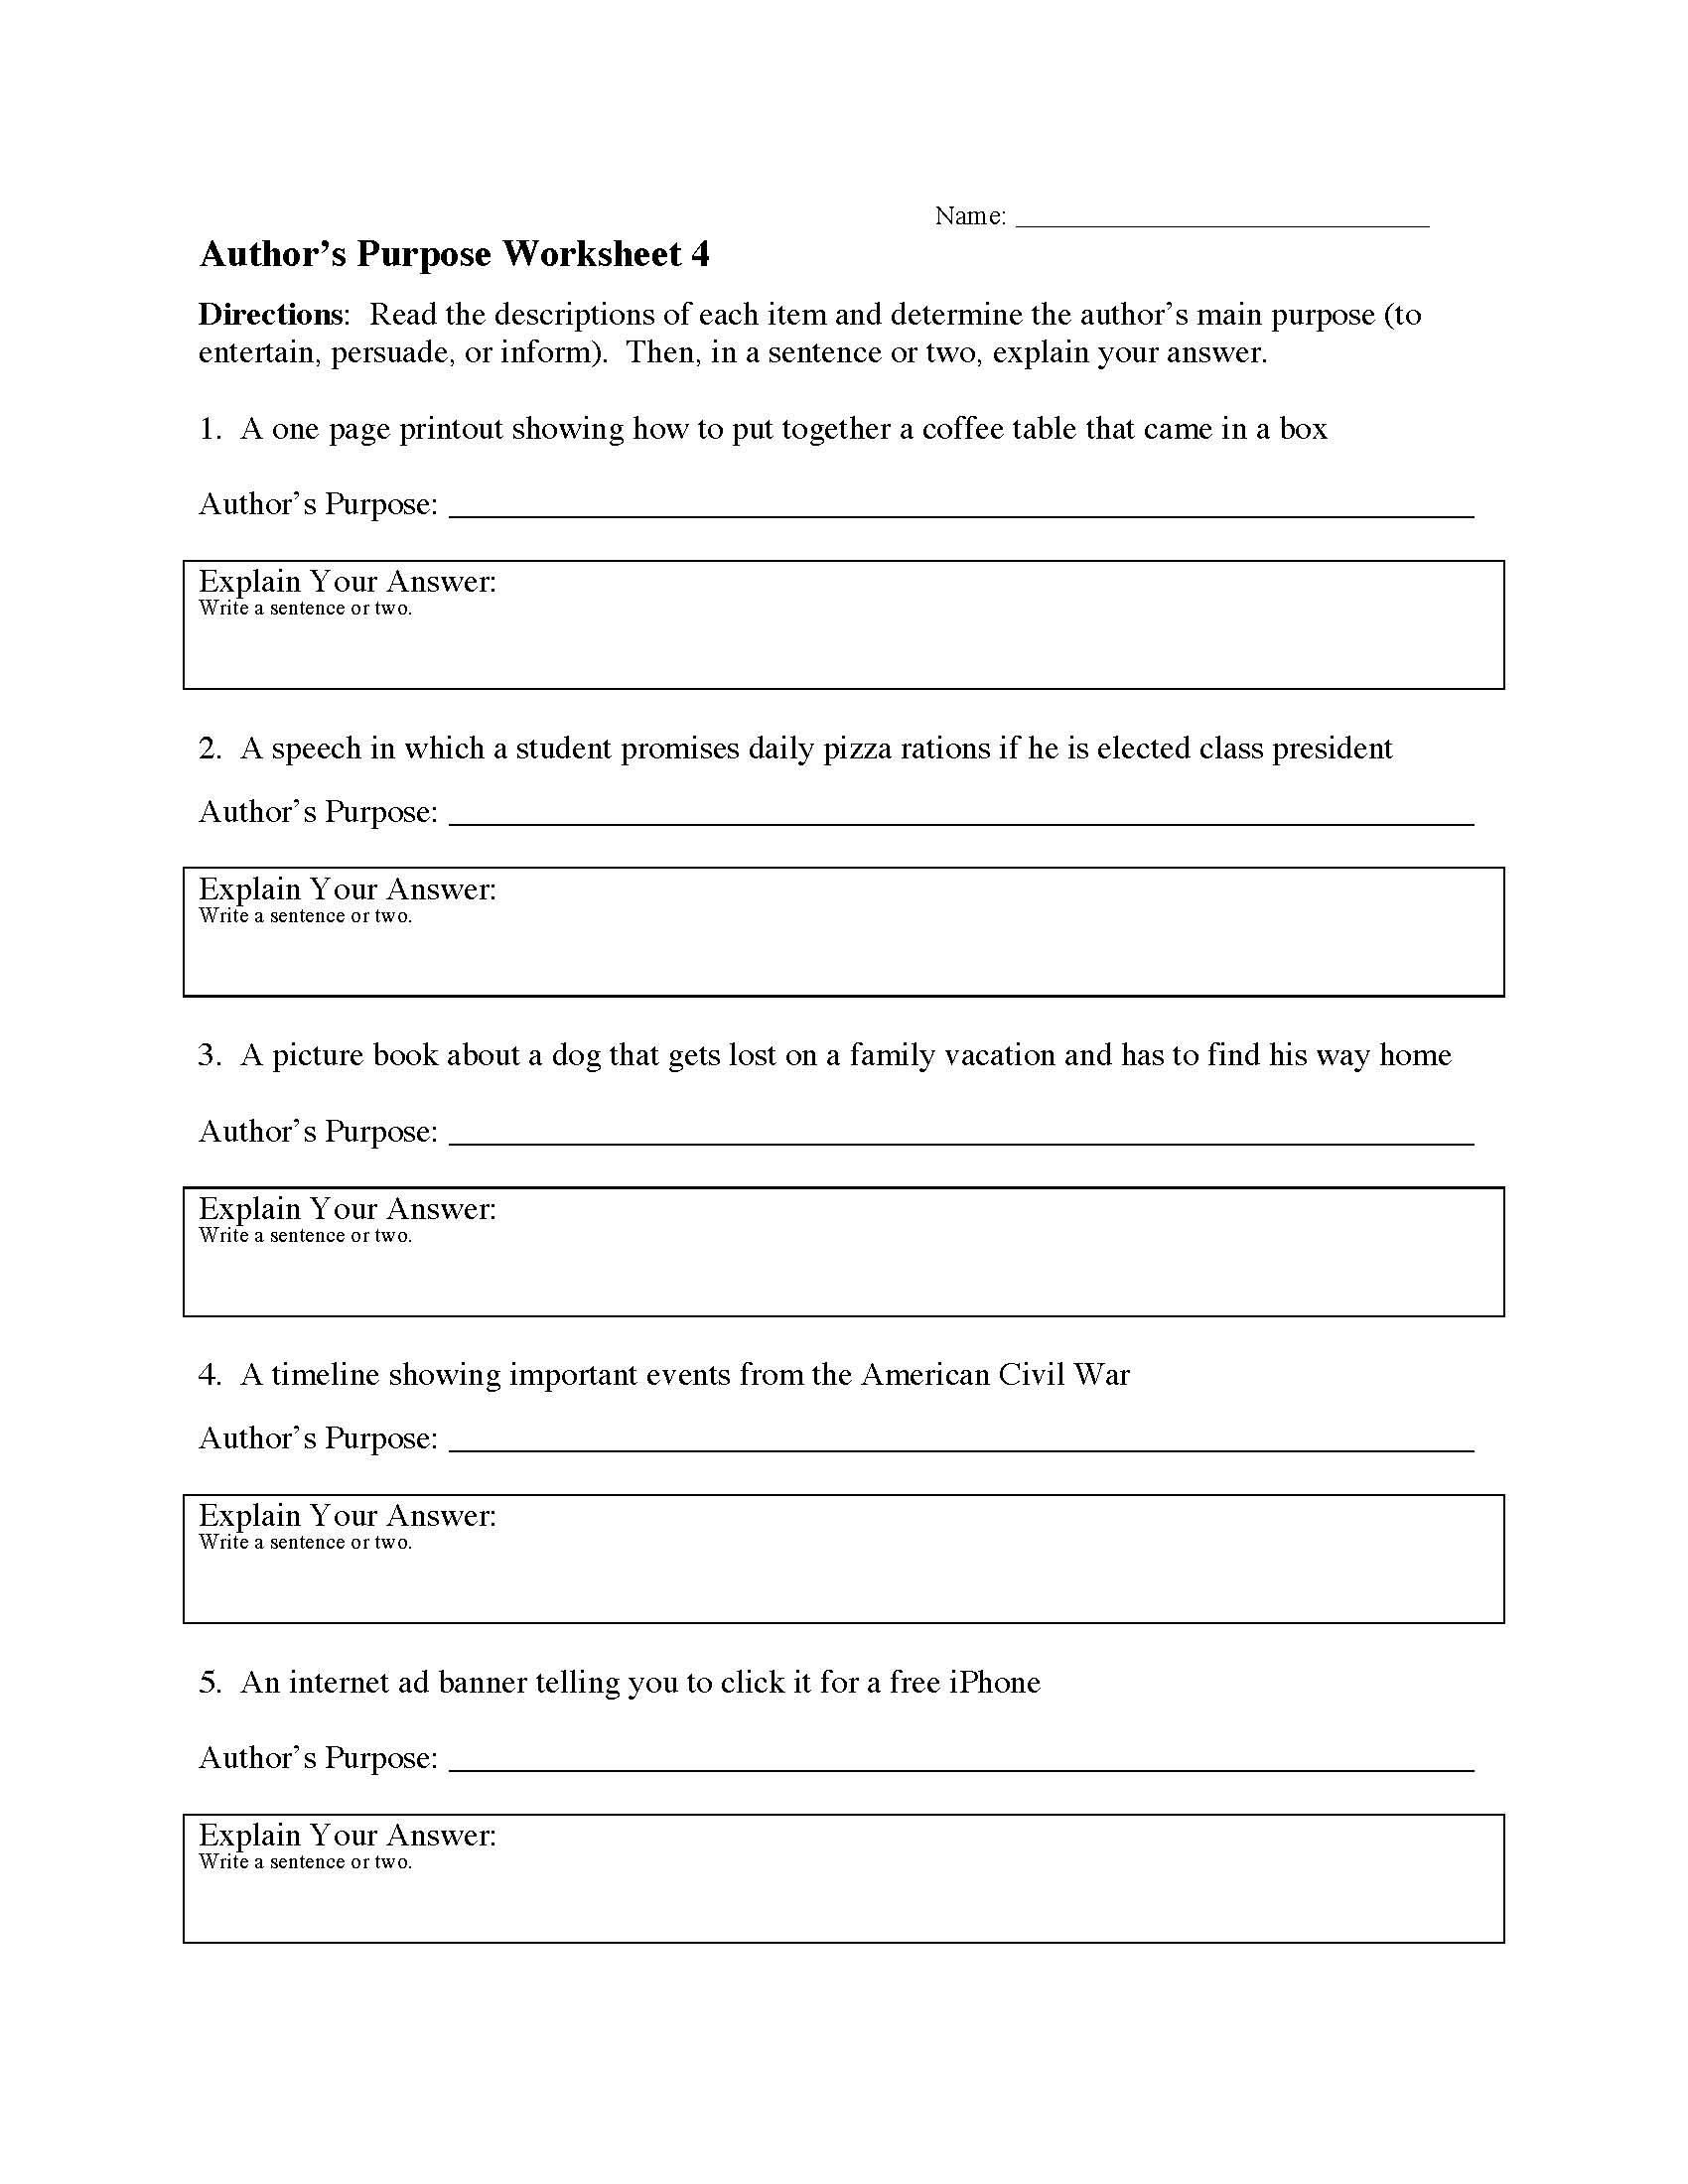 author-s-purpose-worksheet-4-preview